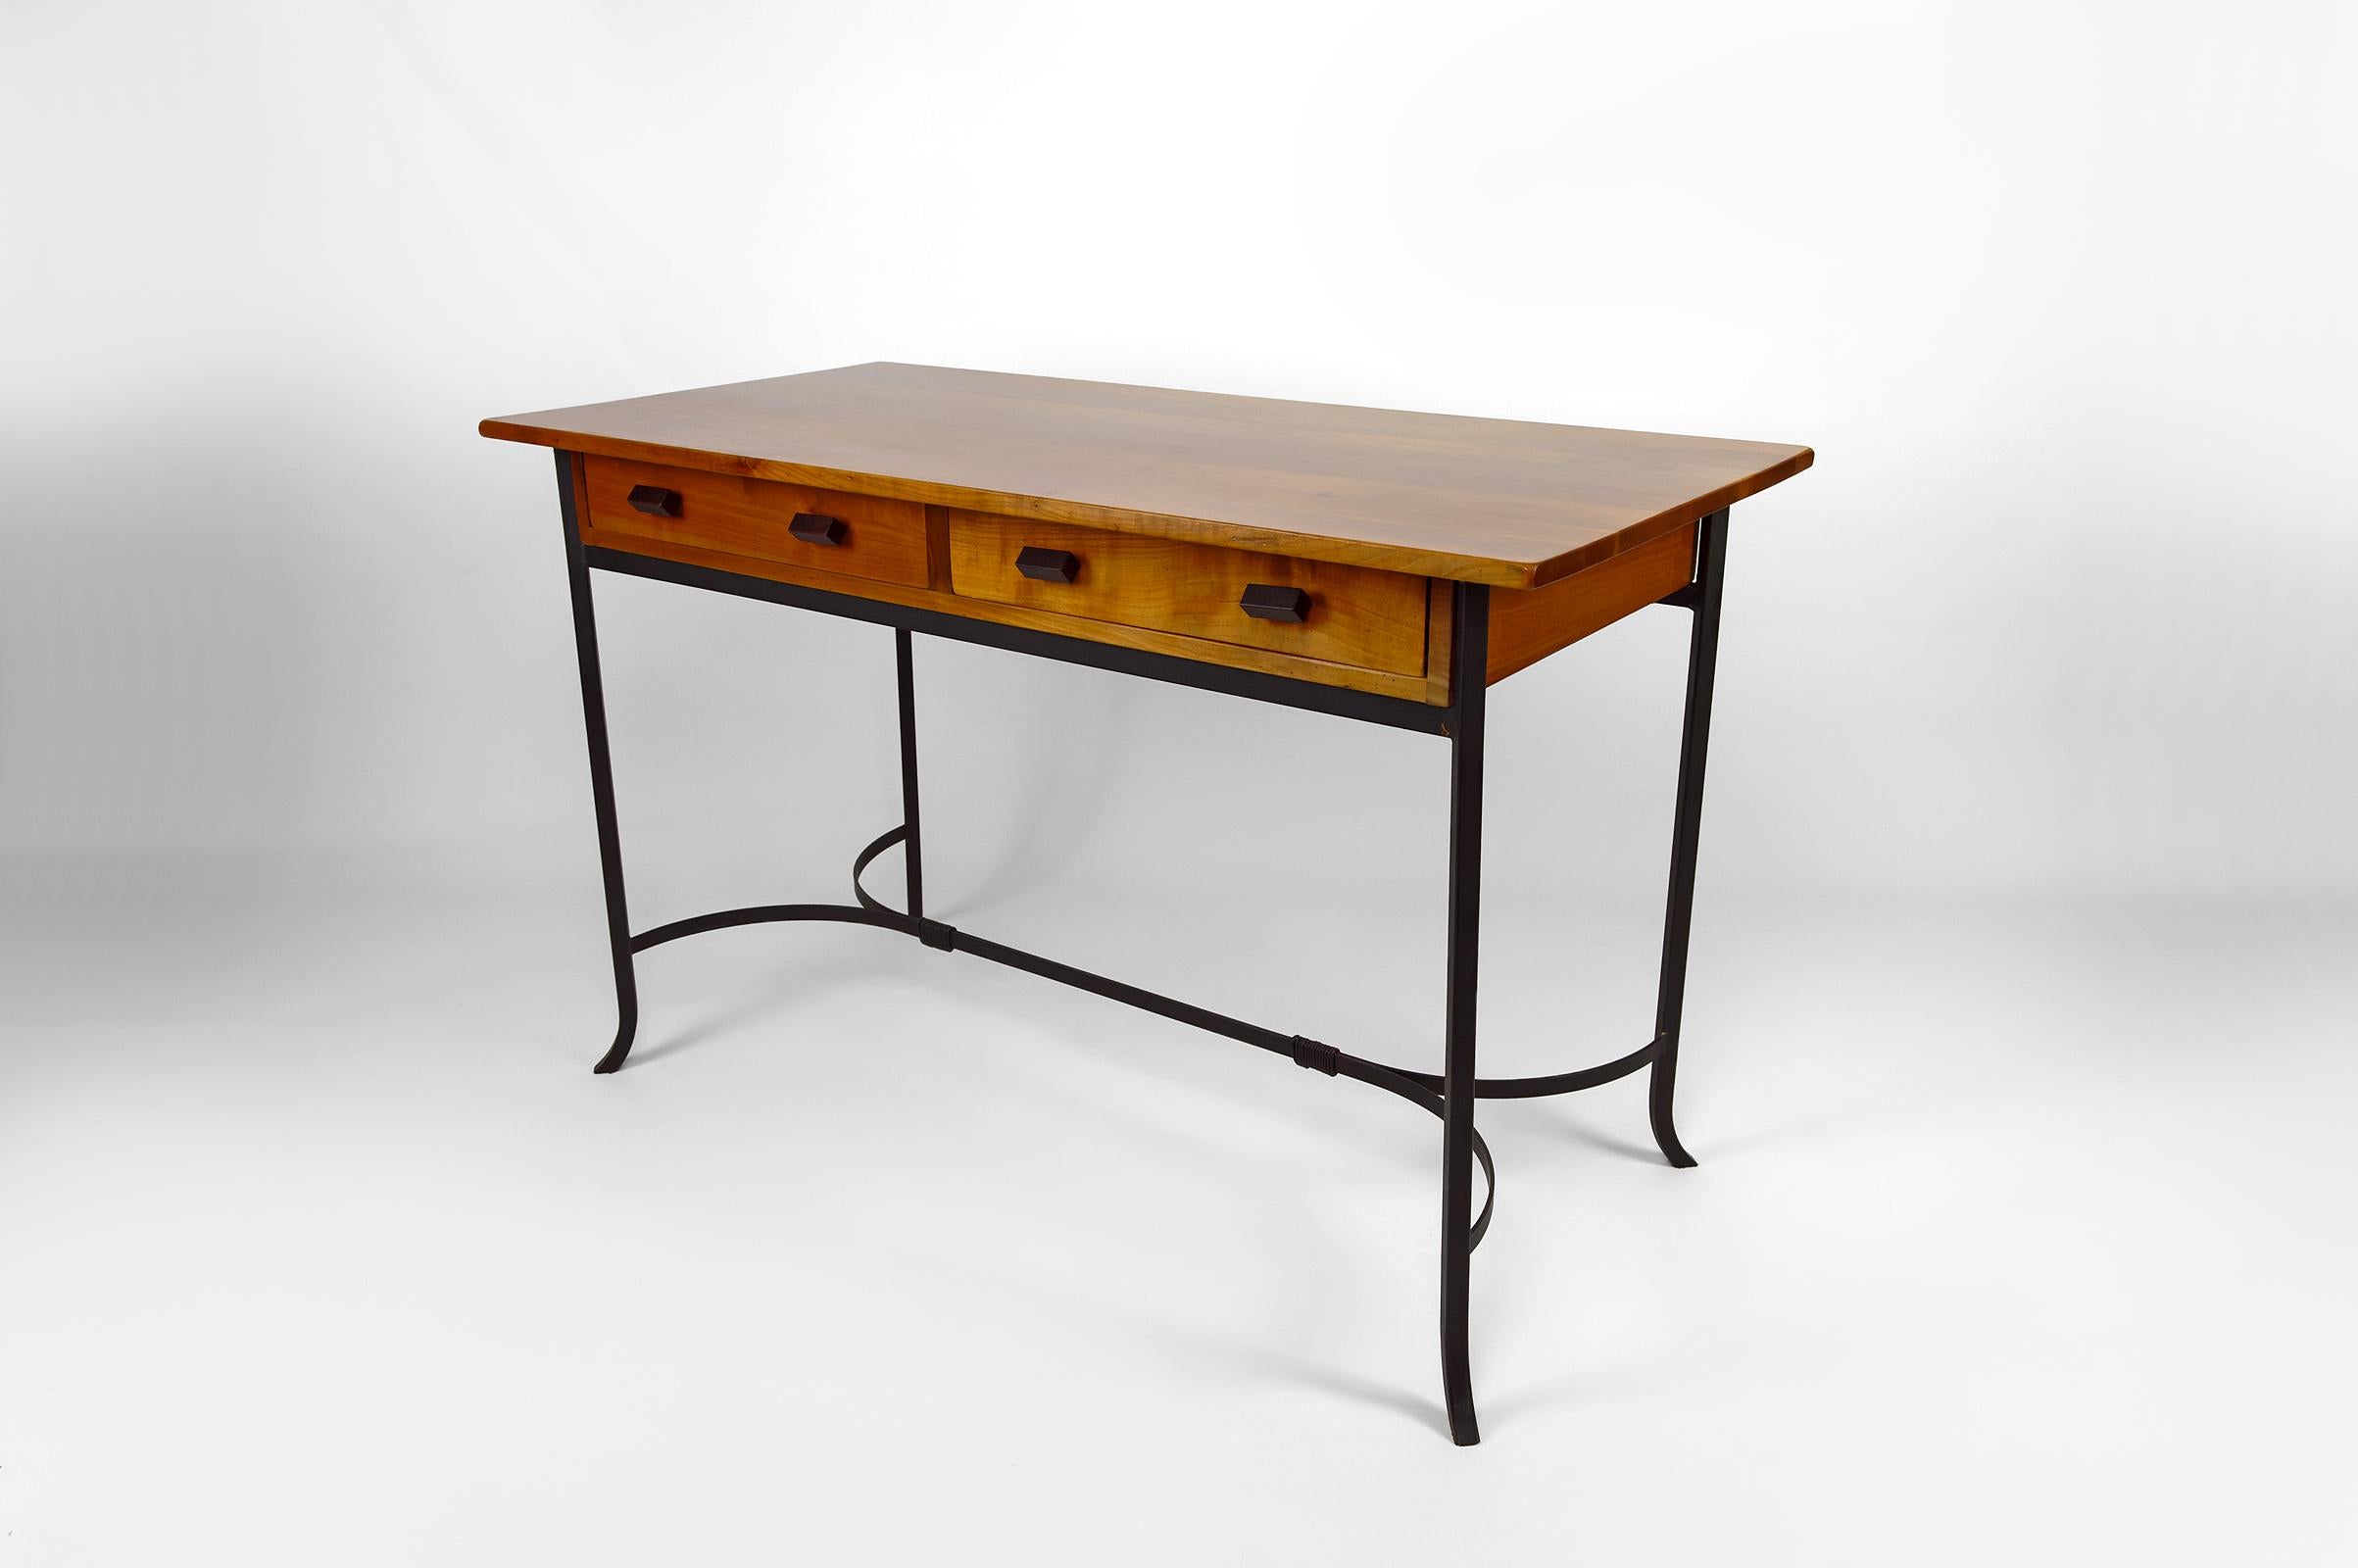 French Modernist Desk in Cherry Wood and Wrought Iron, circa 1980